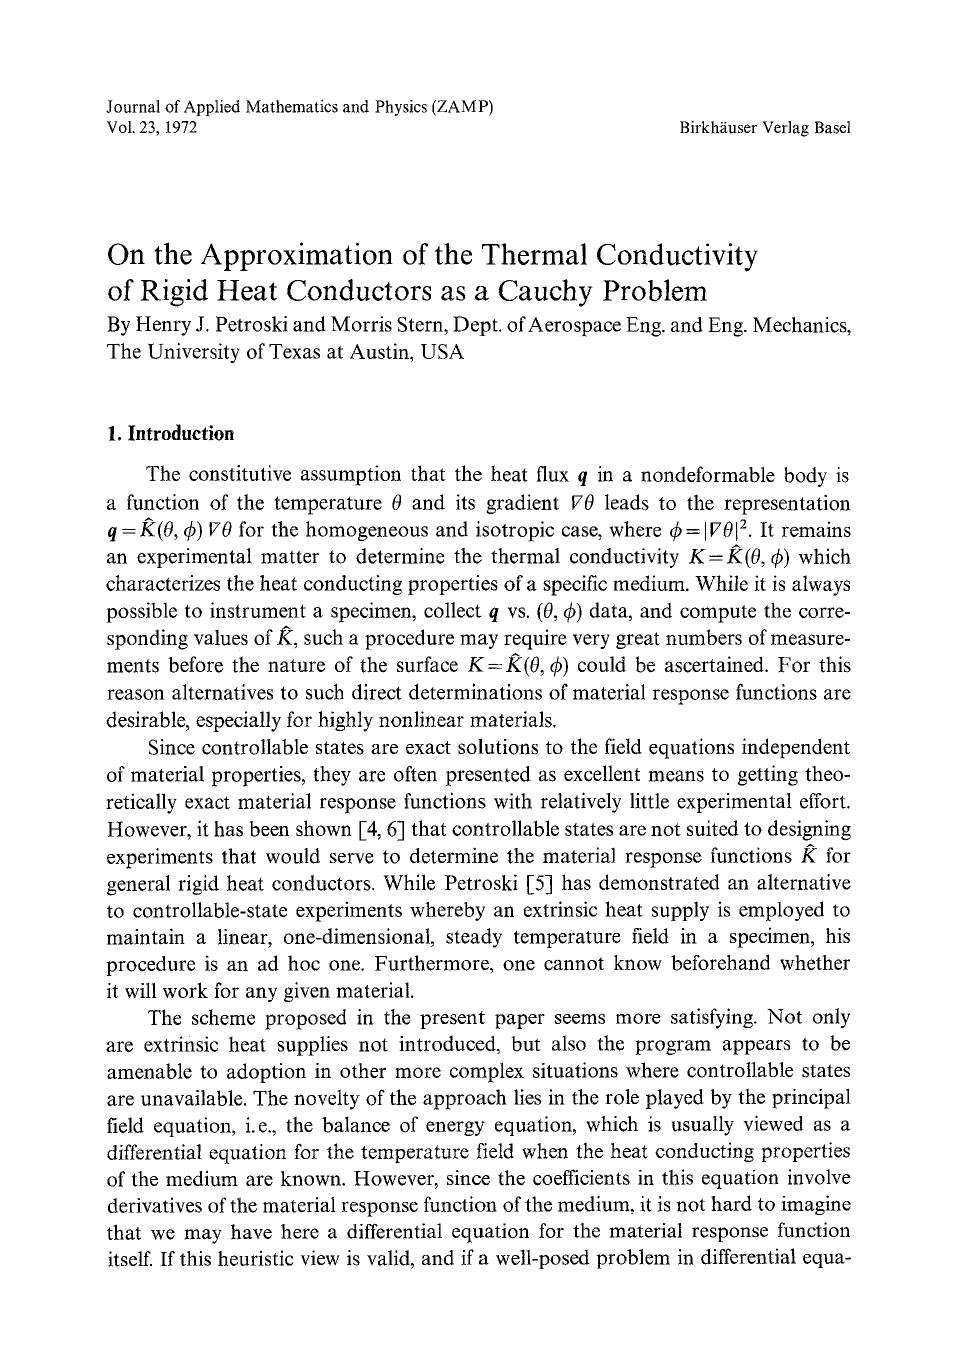 On the approximation of the thermal conductivity of rigid heat conductors as a Cauchy Problem by On the Approximation of the Thermal Conductivity of Rigid Heat... (1972)